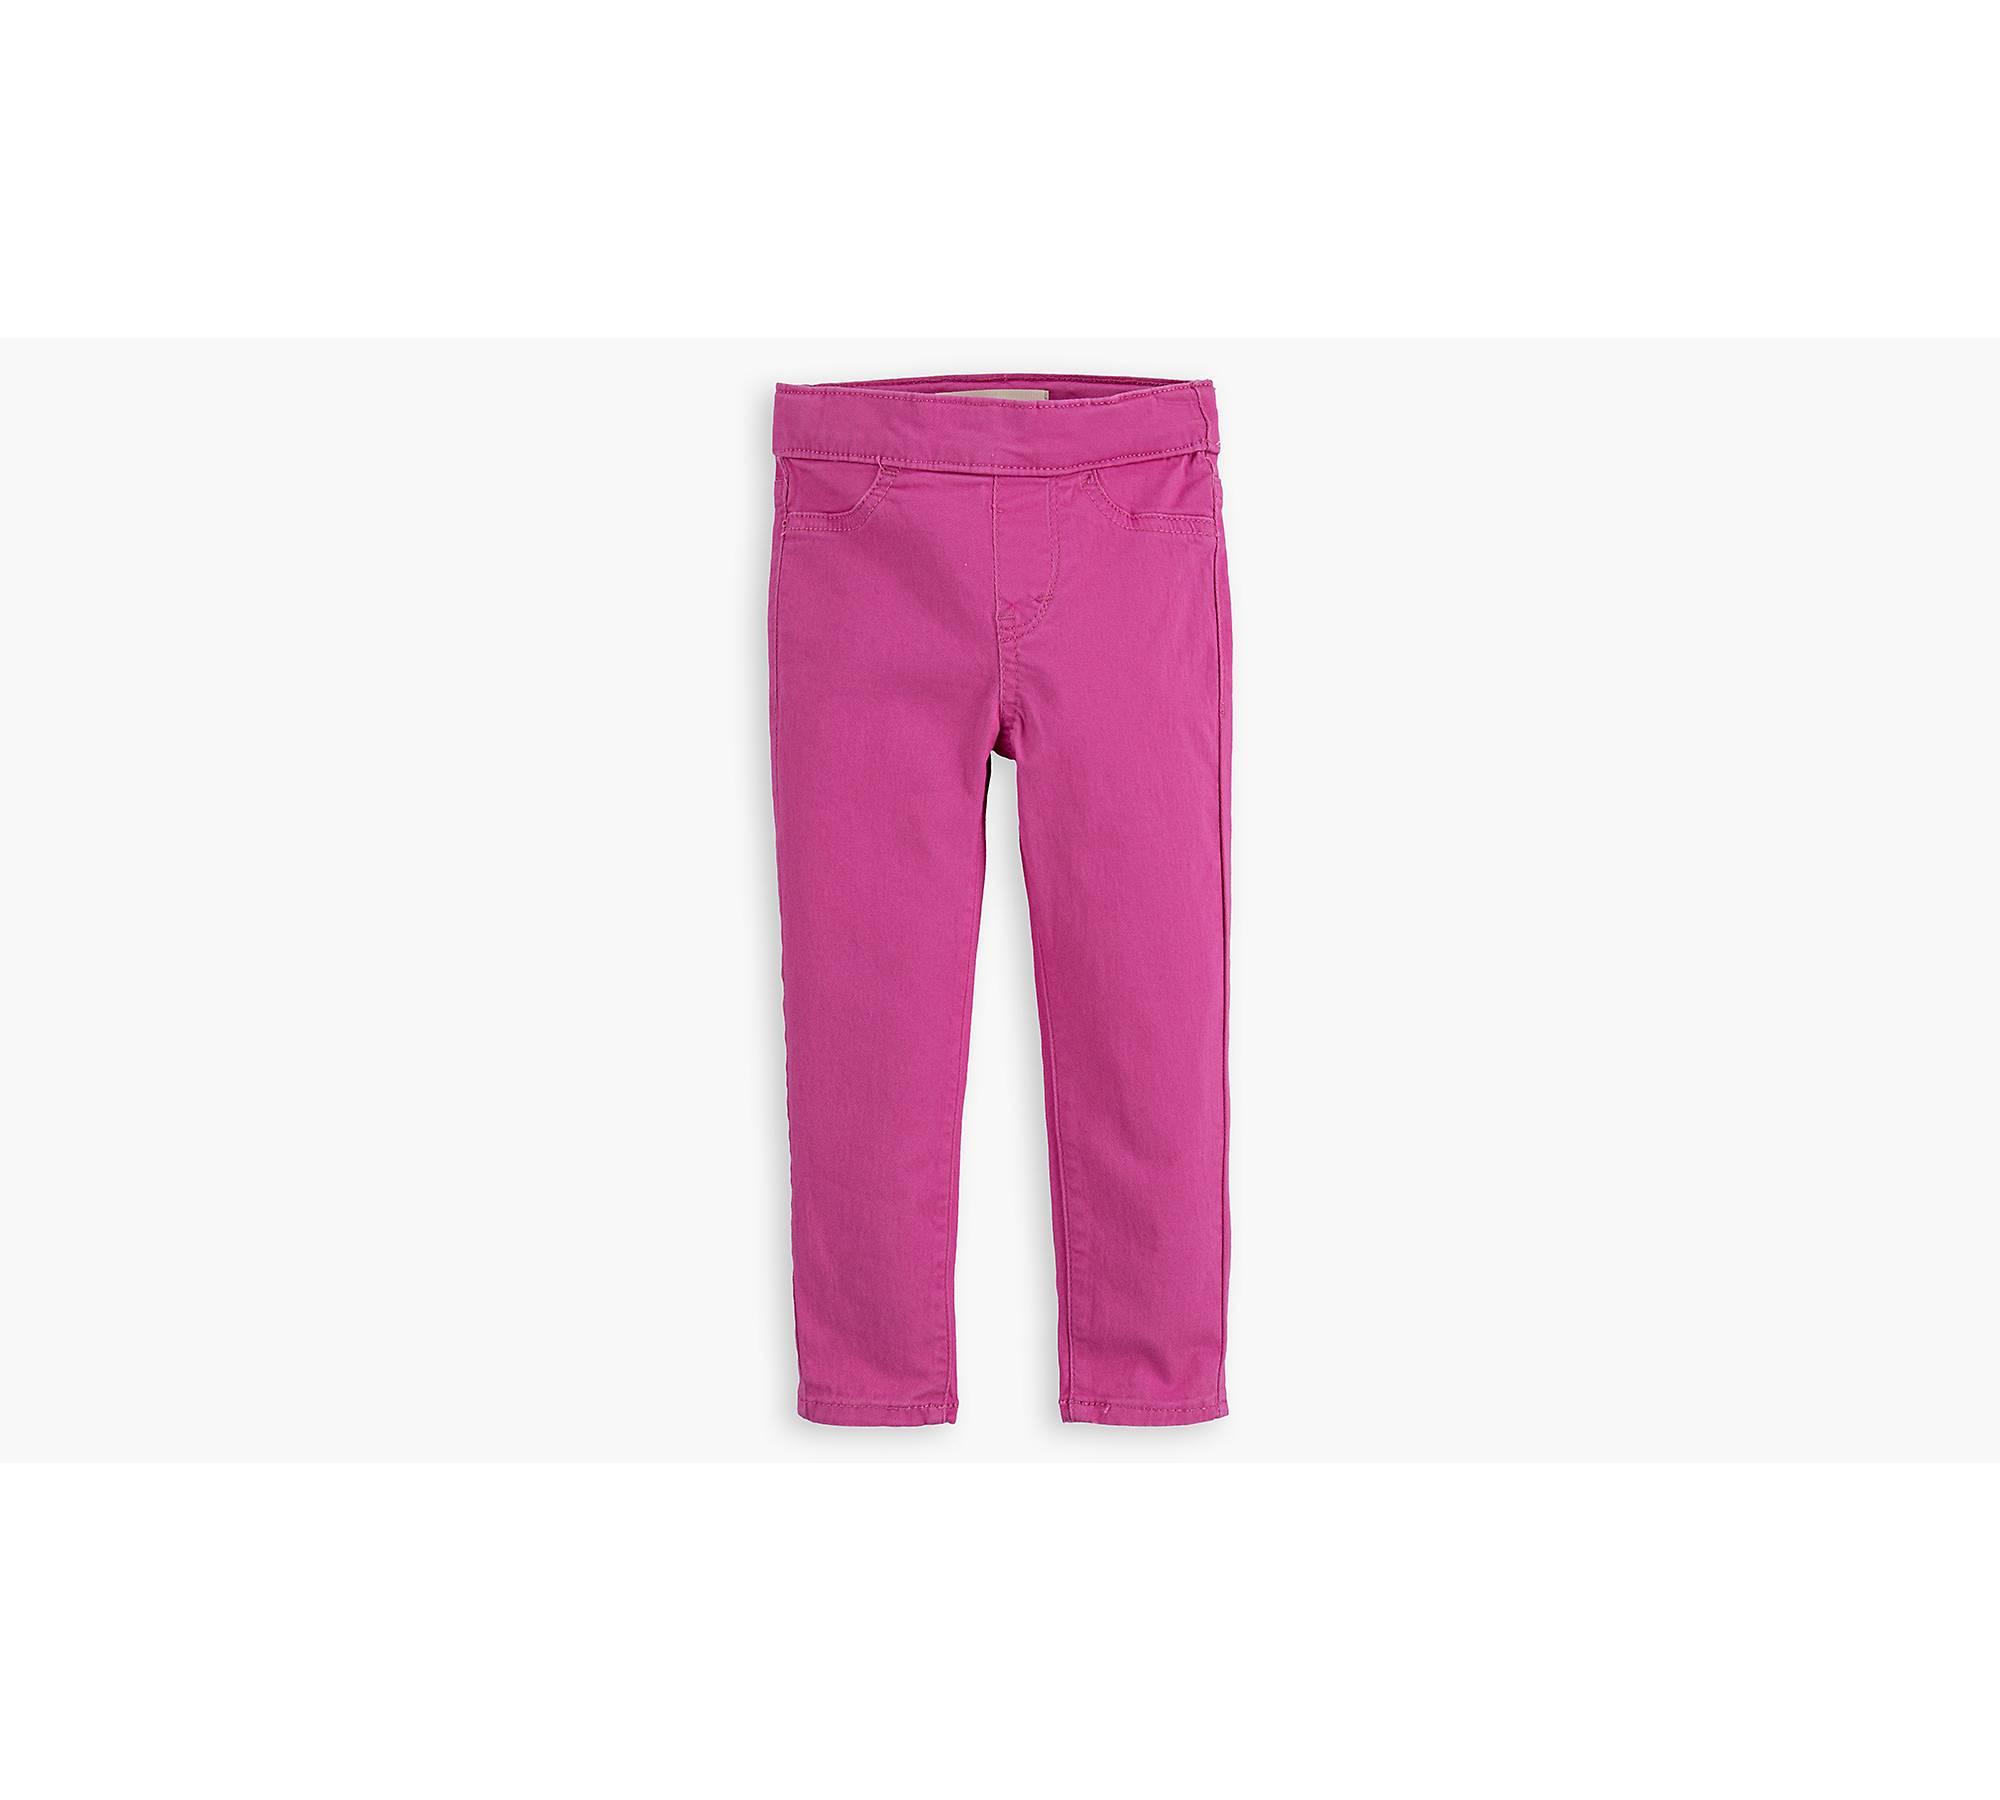 Toddler Girls (2t-4t) Pull-on Jeggings - Pink | Levi's® US